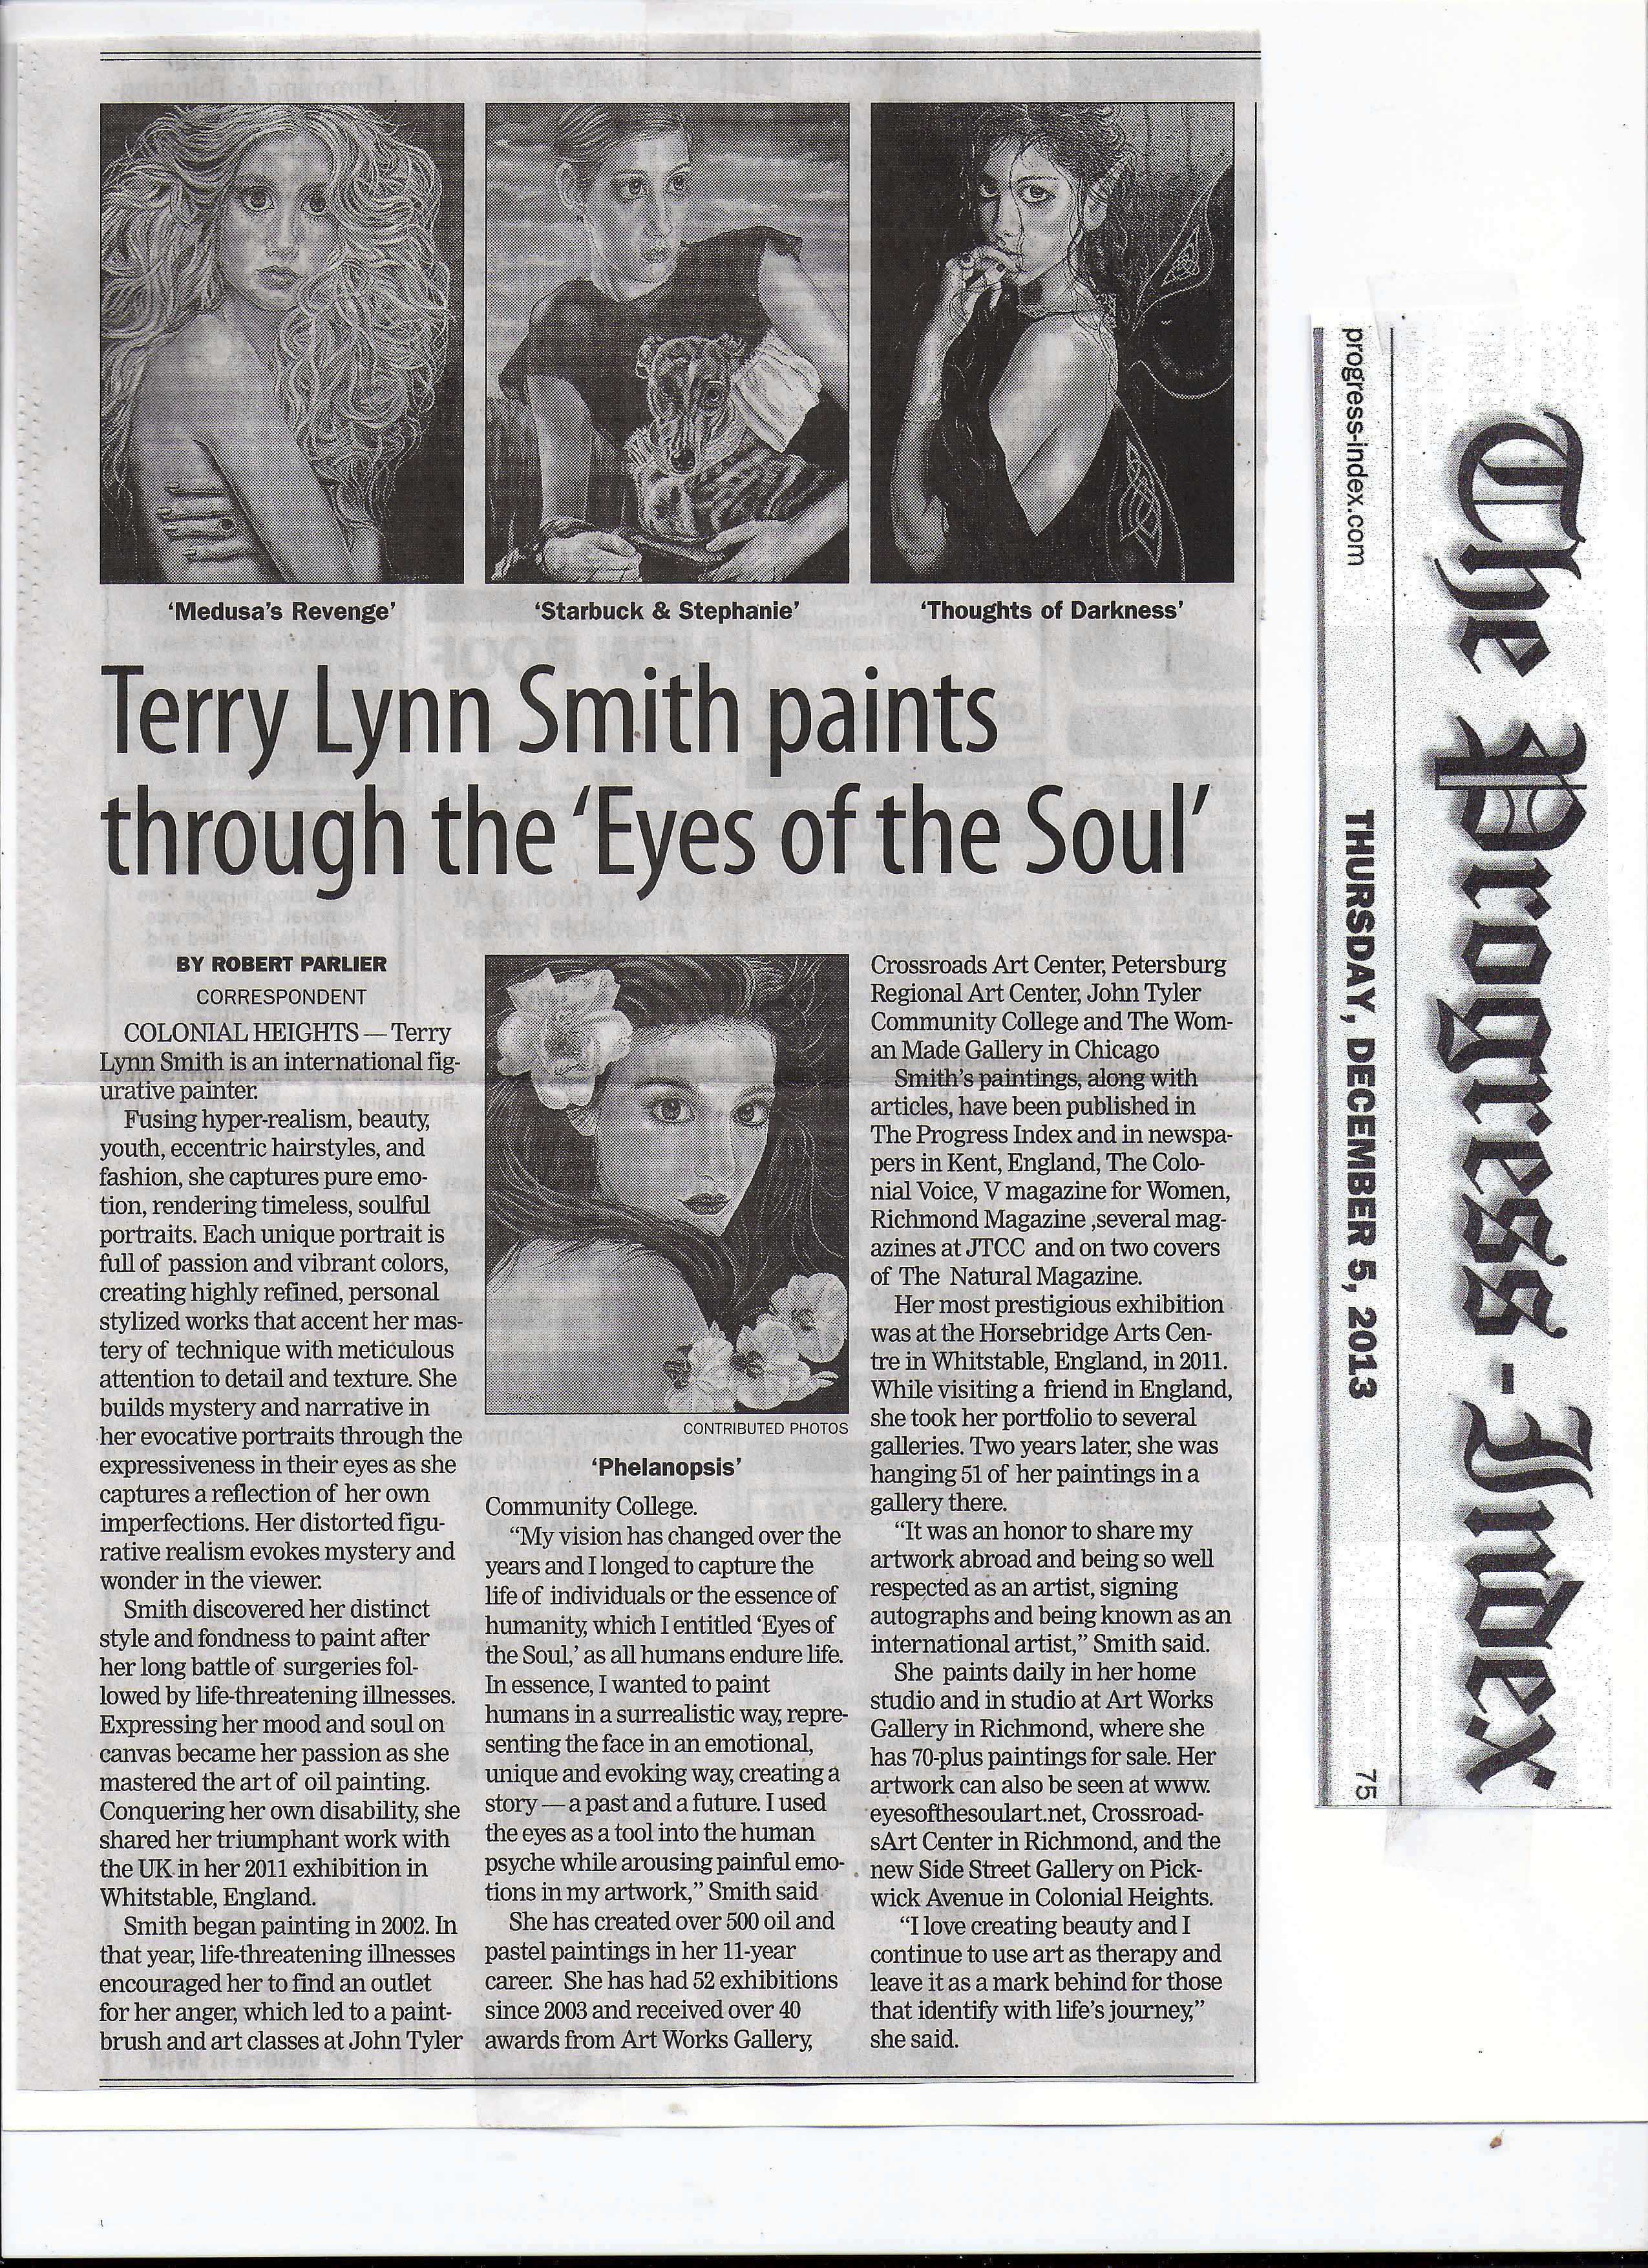 2013 The Progress-Index Newspaper Article About Terry Lynn Smith